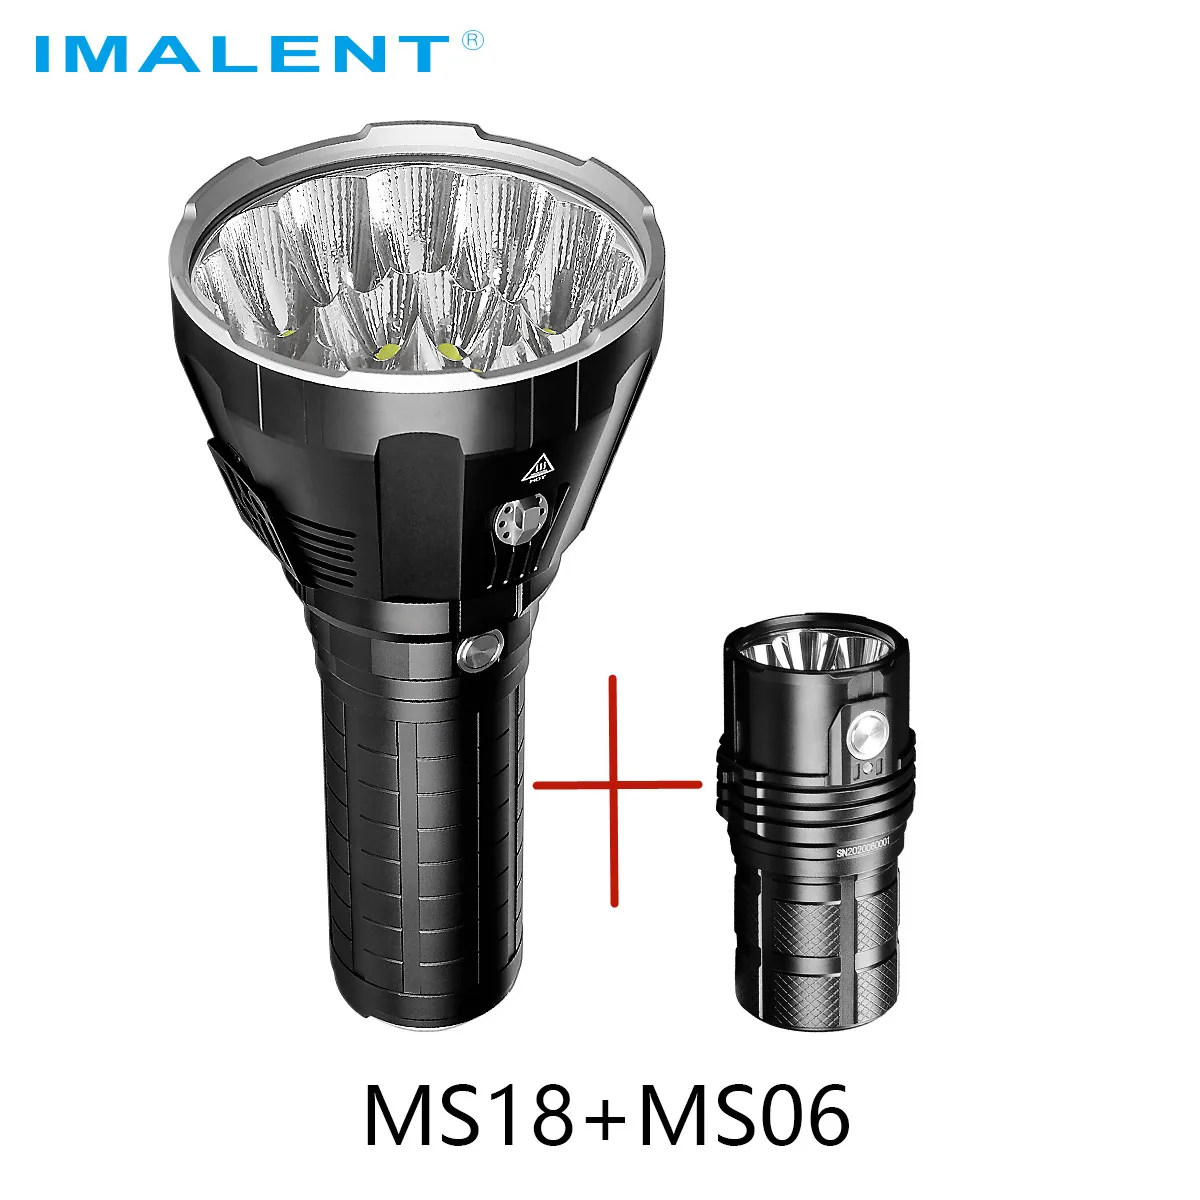 IMALENT MS18+MS06 Professional Convoy Flashlight Rechargeable 6-8 Mode 25000LM CREE XHP Led Lamp Super Bright Lantern Batteries